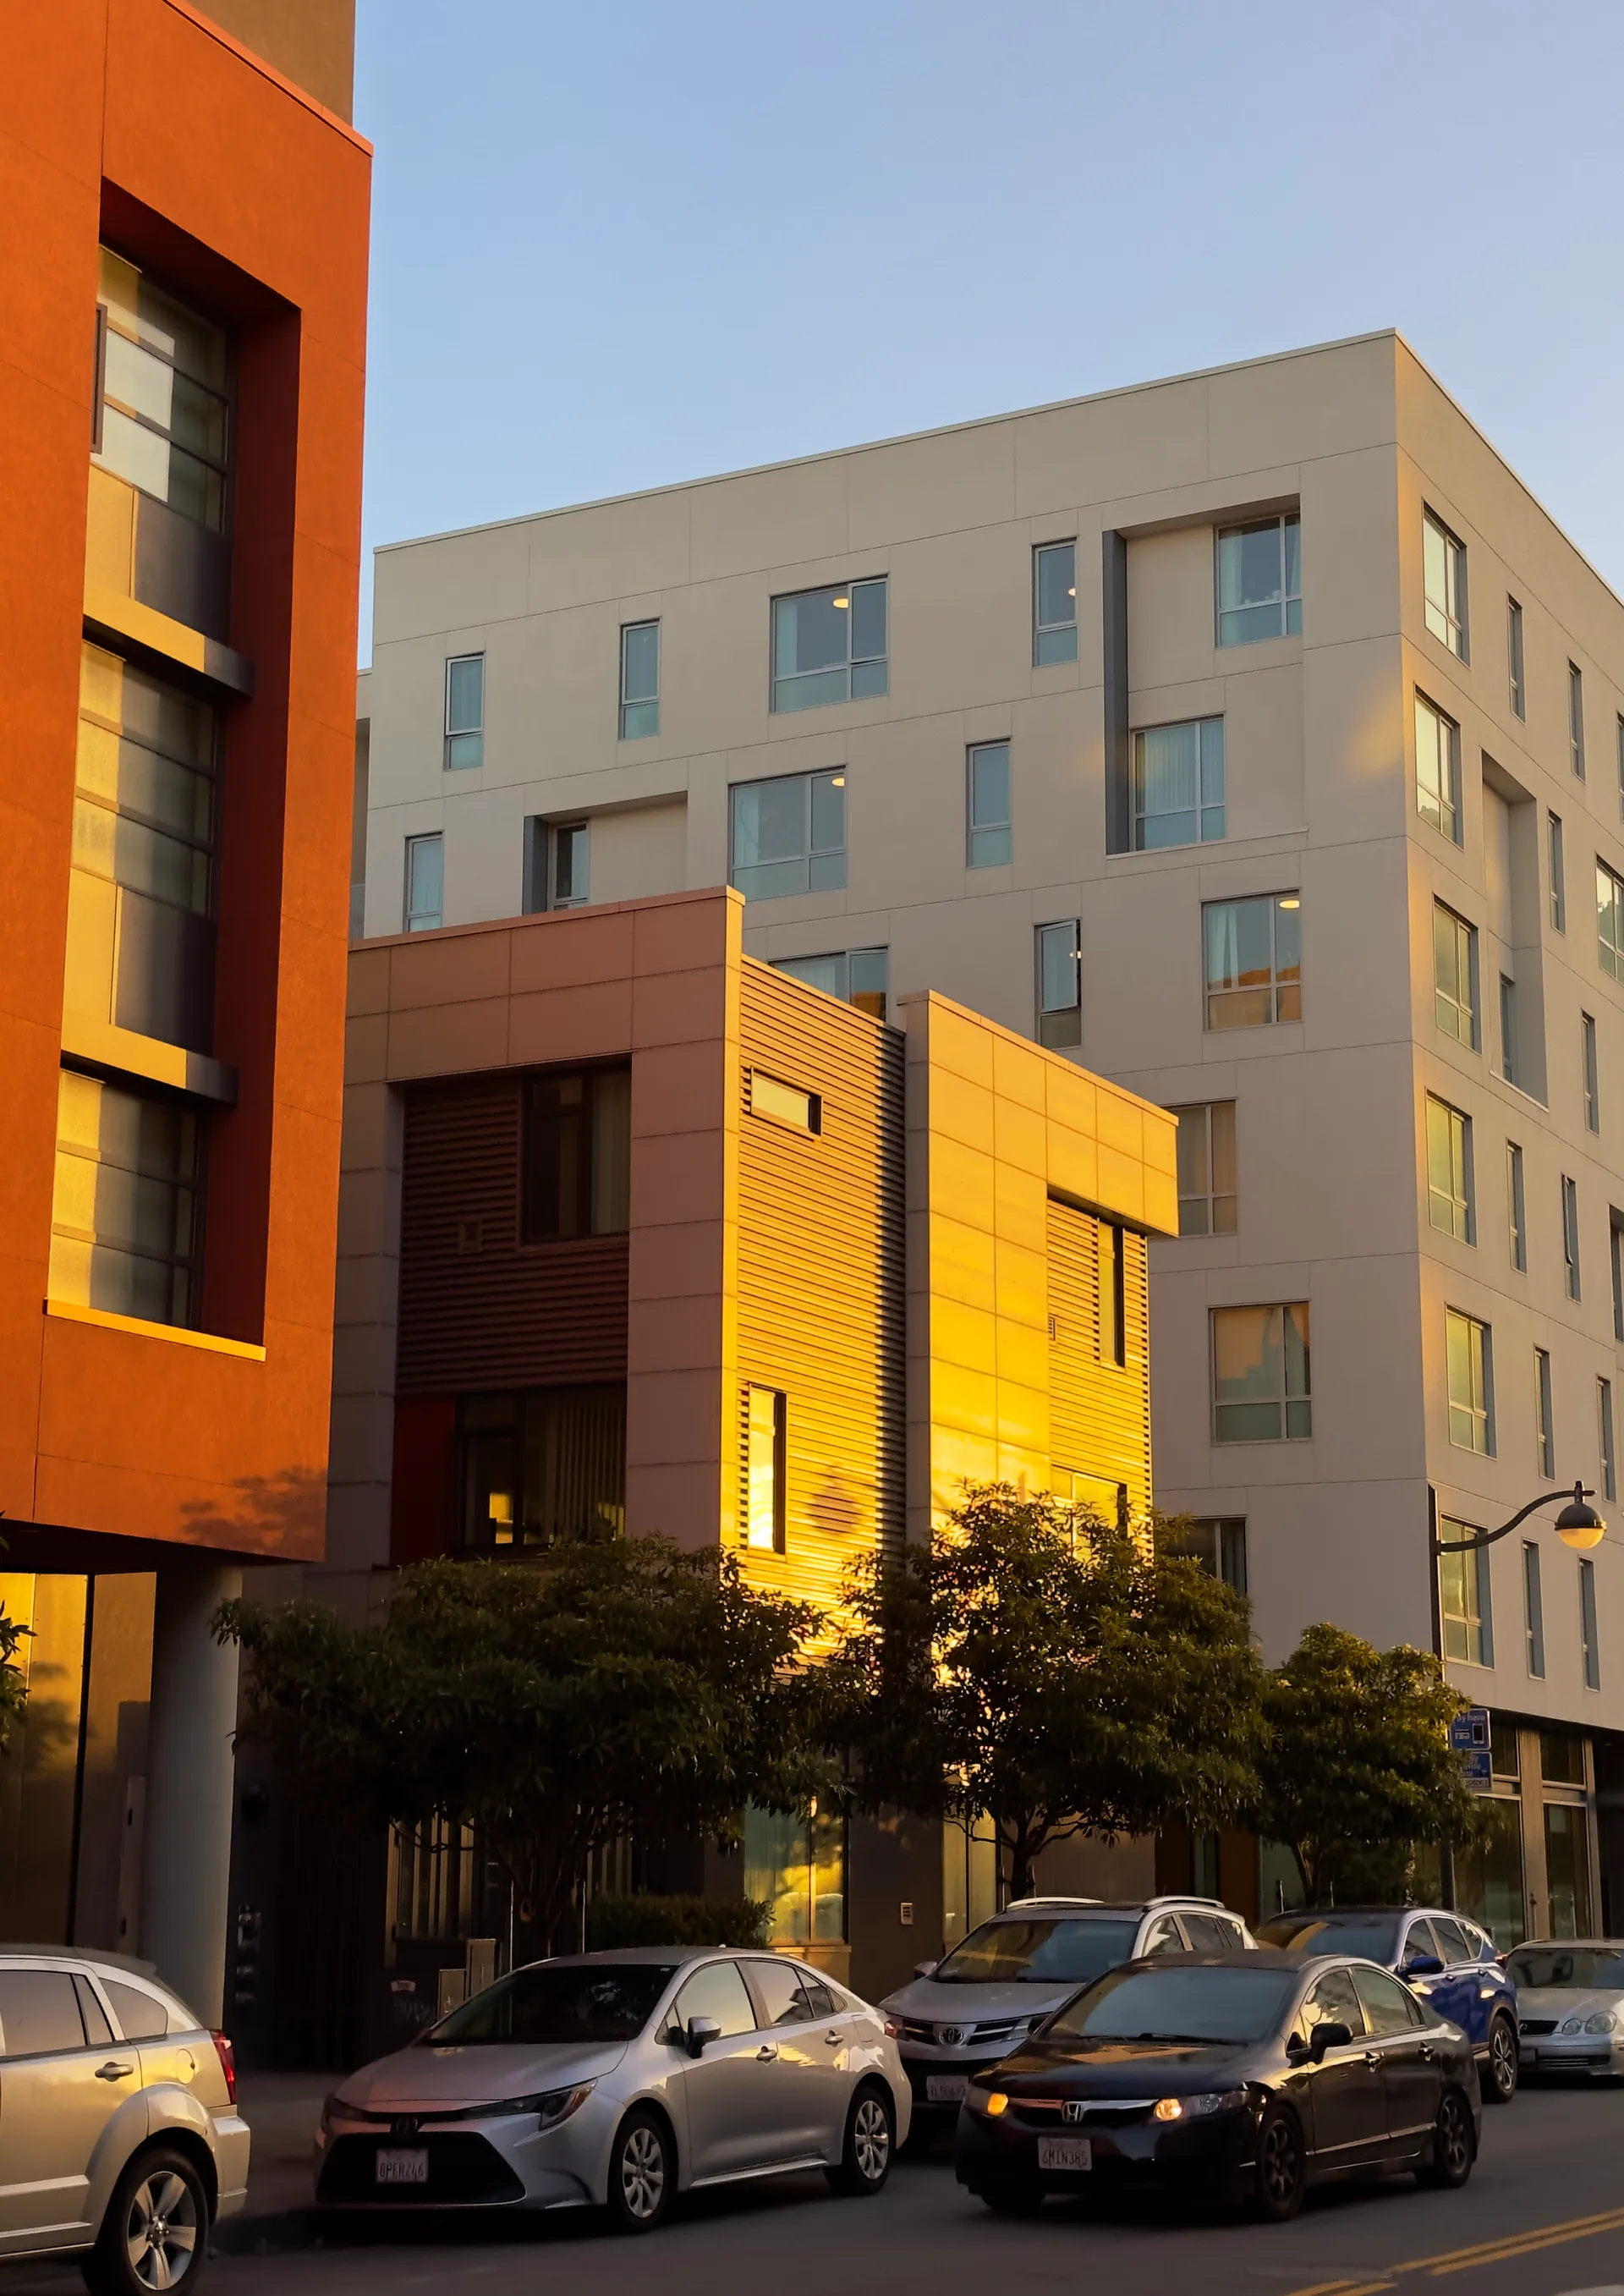 An apartment building in Mission Bay during golden hour